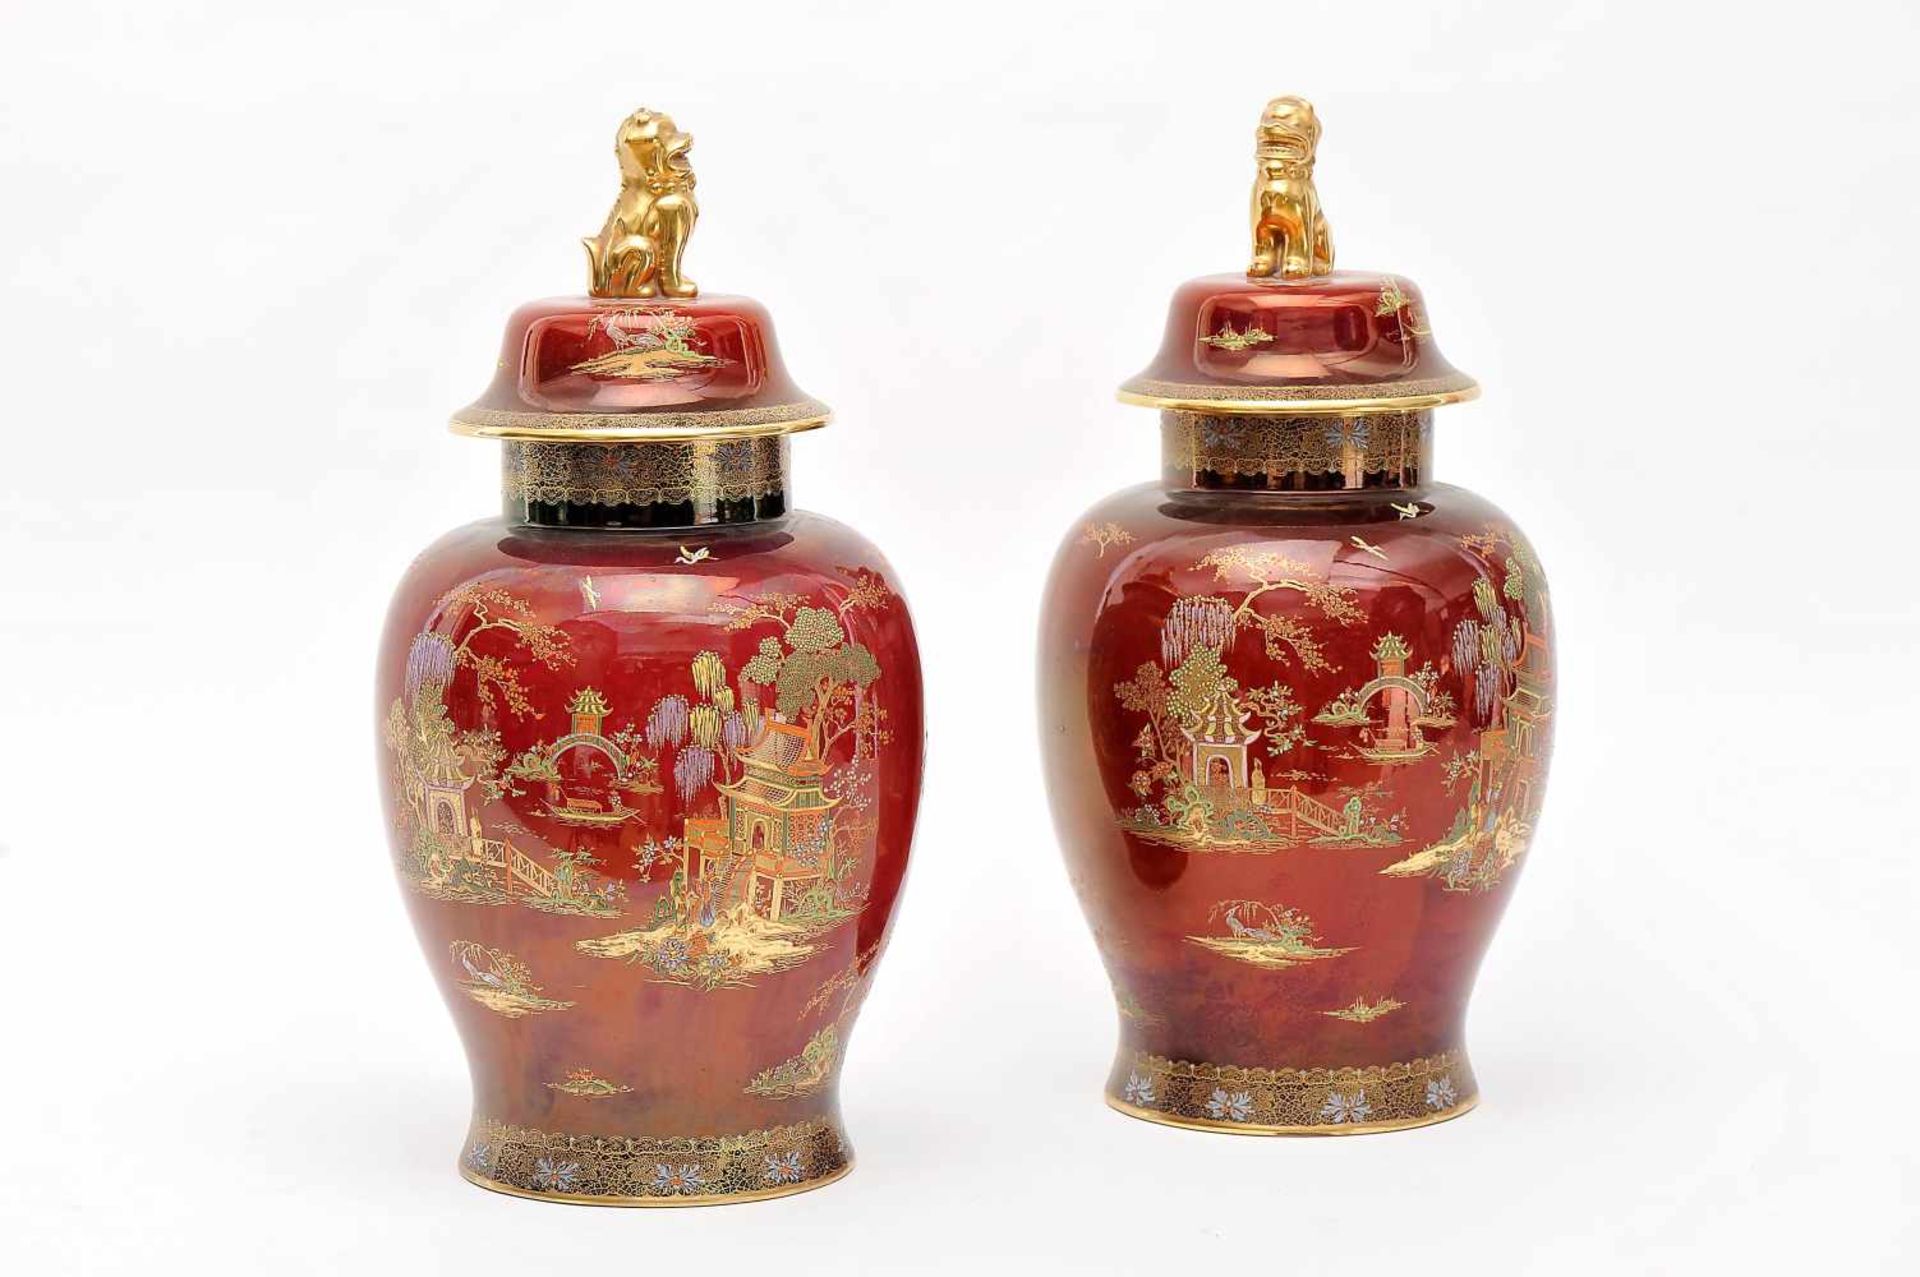 A Pair of Covered Pots, stone powder Carlton Ware, polychrome and gilt decoration on burgundy